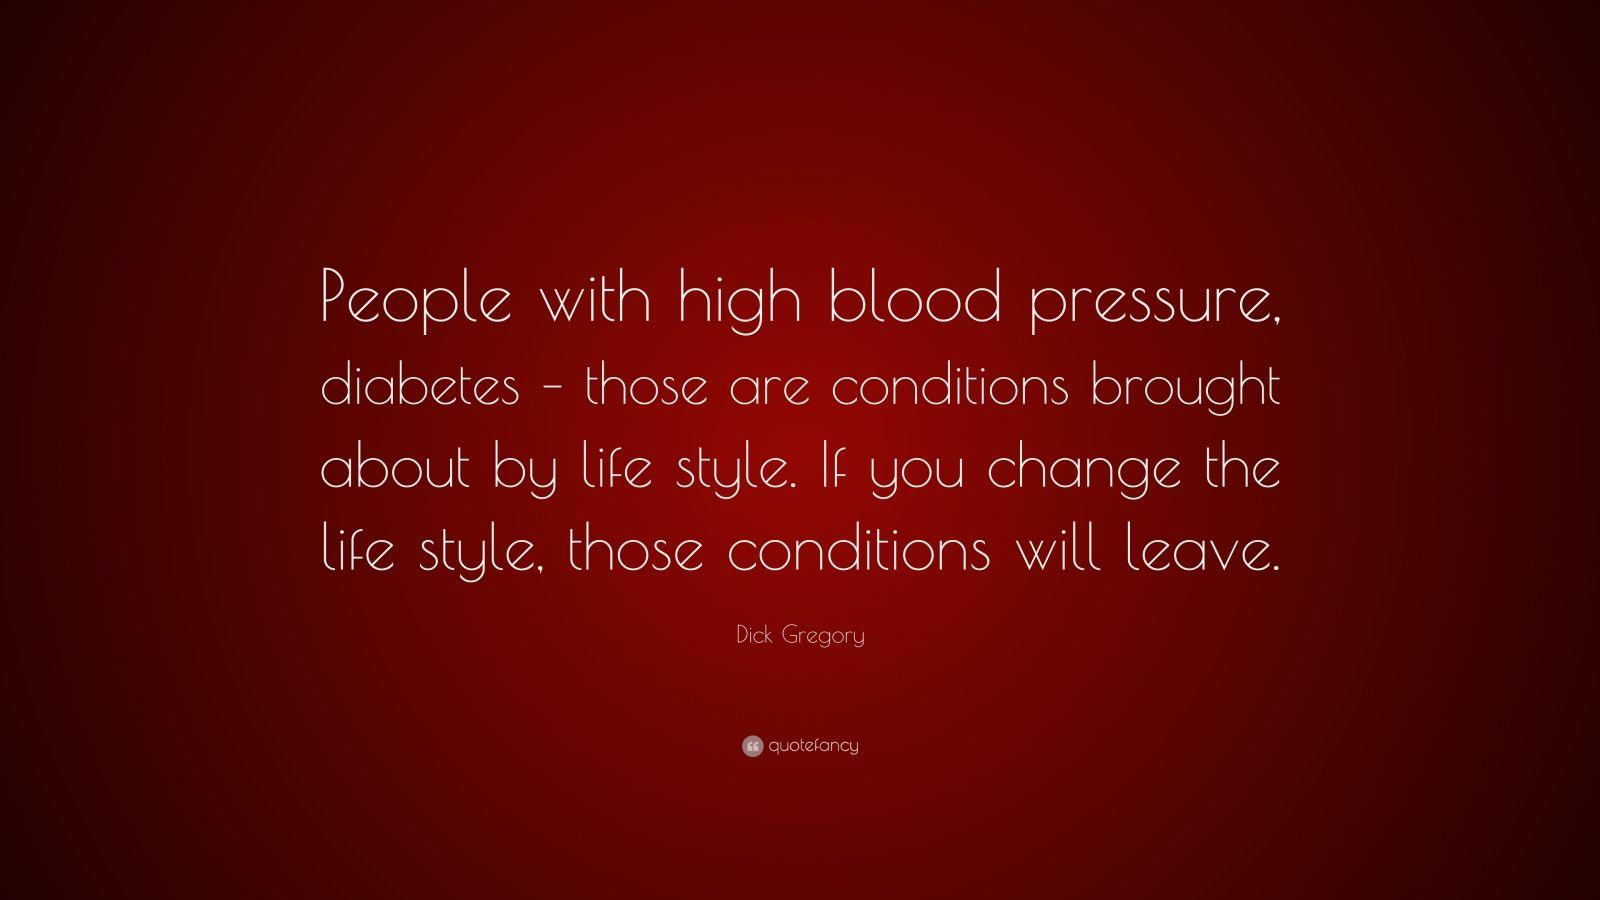 Dick Gregory Quote: “People with high blood pressure, diabetes